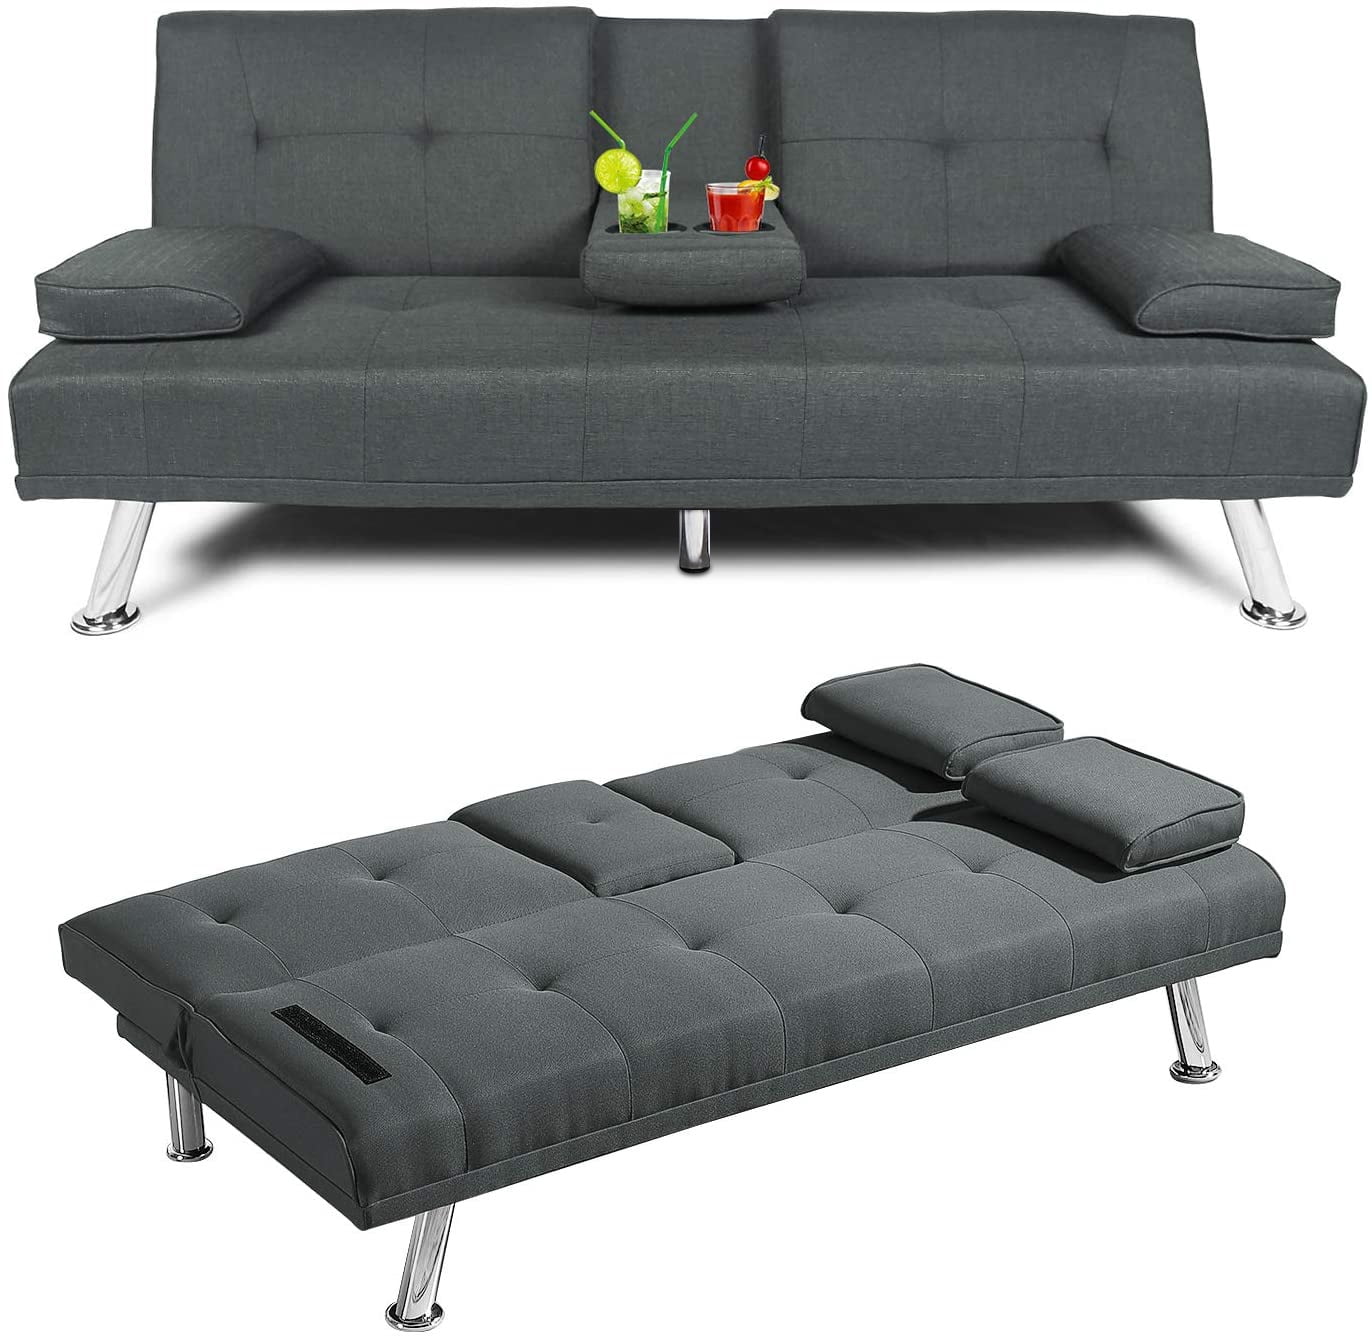 Futon Sofa Bed With Cup Holders 3, Twin Futon Chair Bed